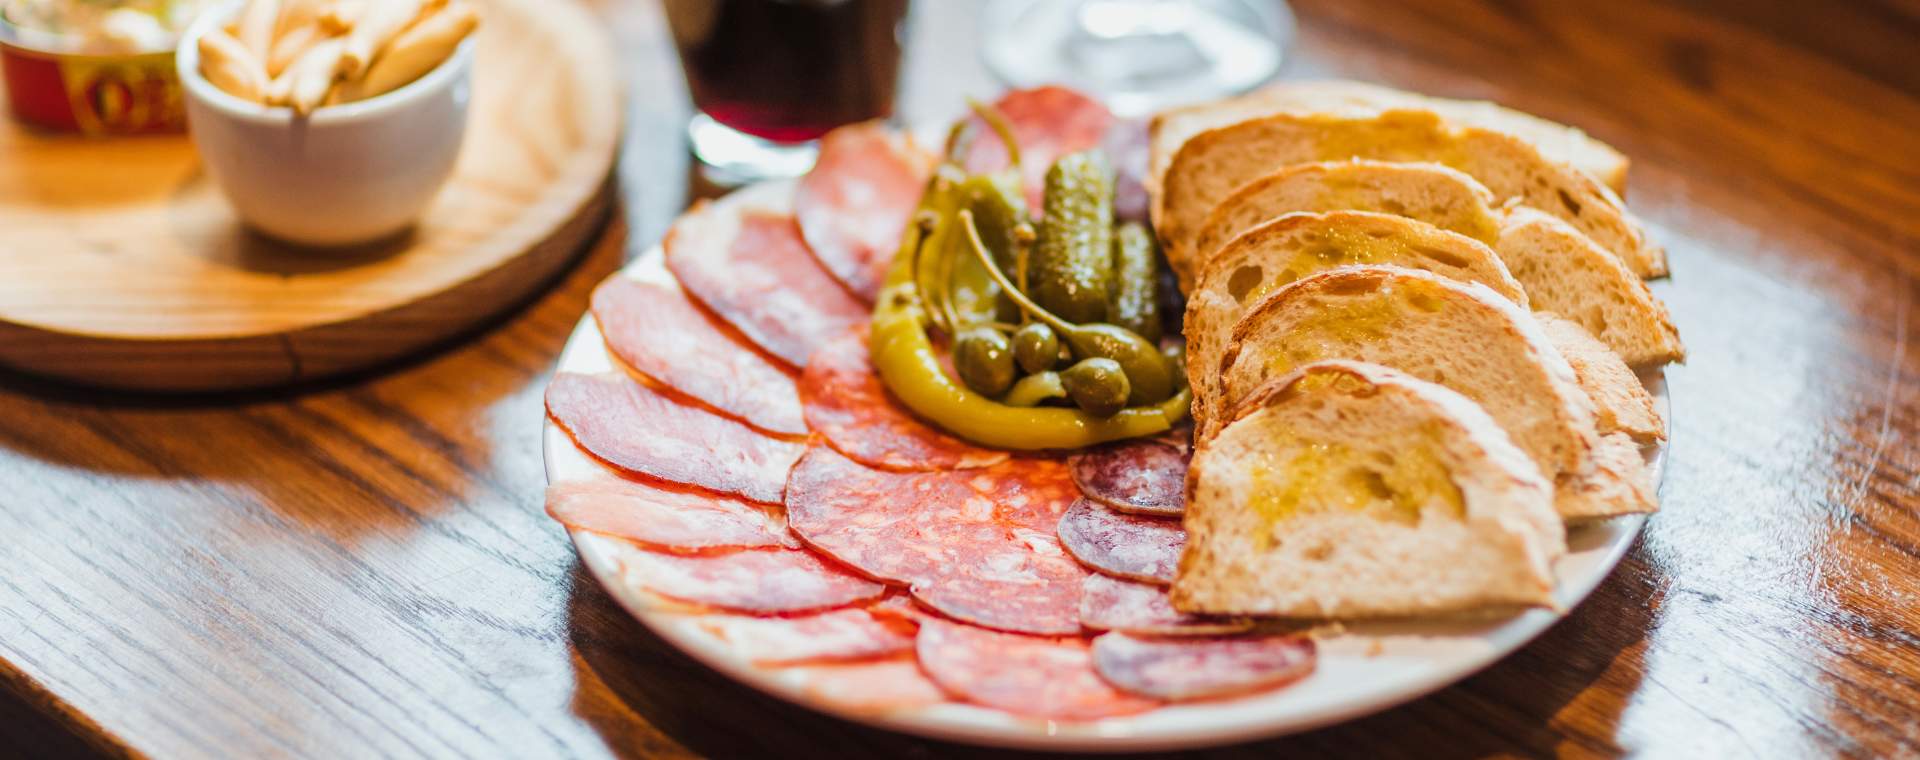 Charcuterie style plate with meat, pickles and bread at the Pig and Whistle.